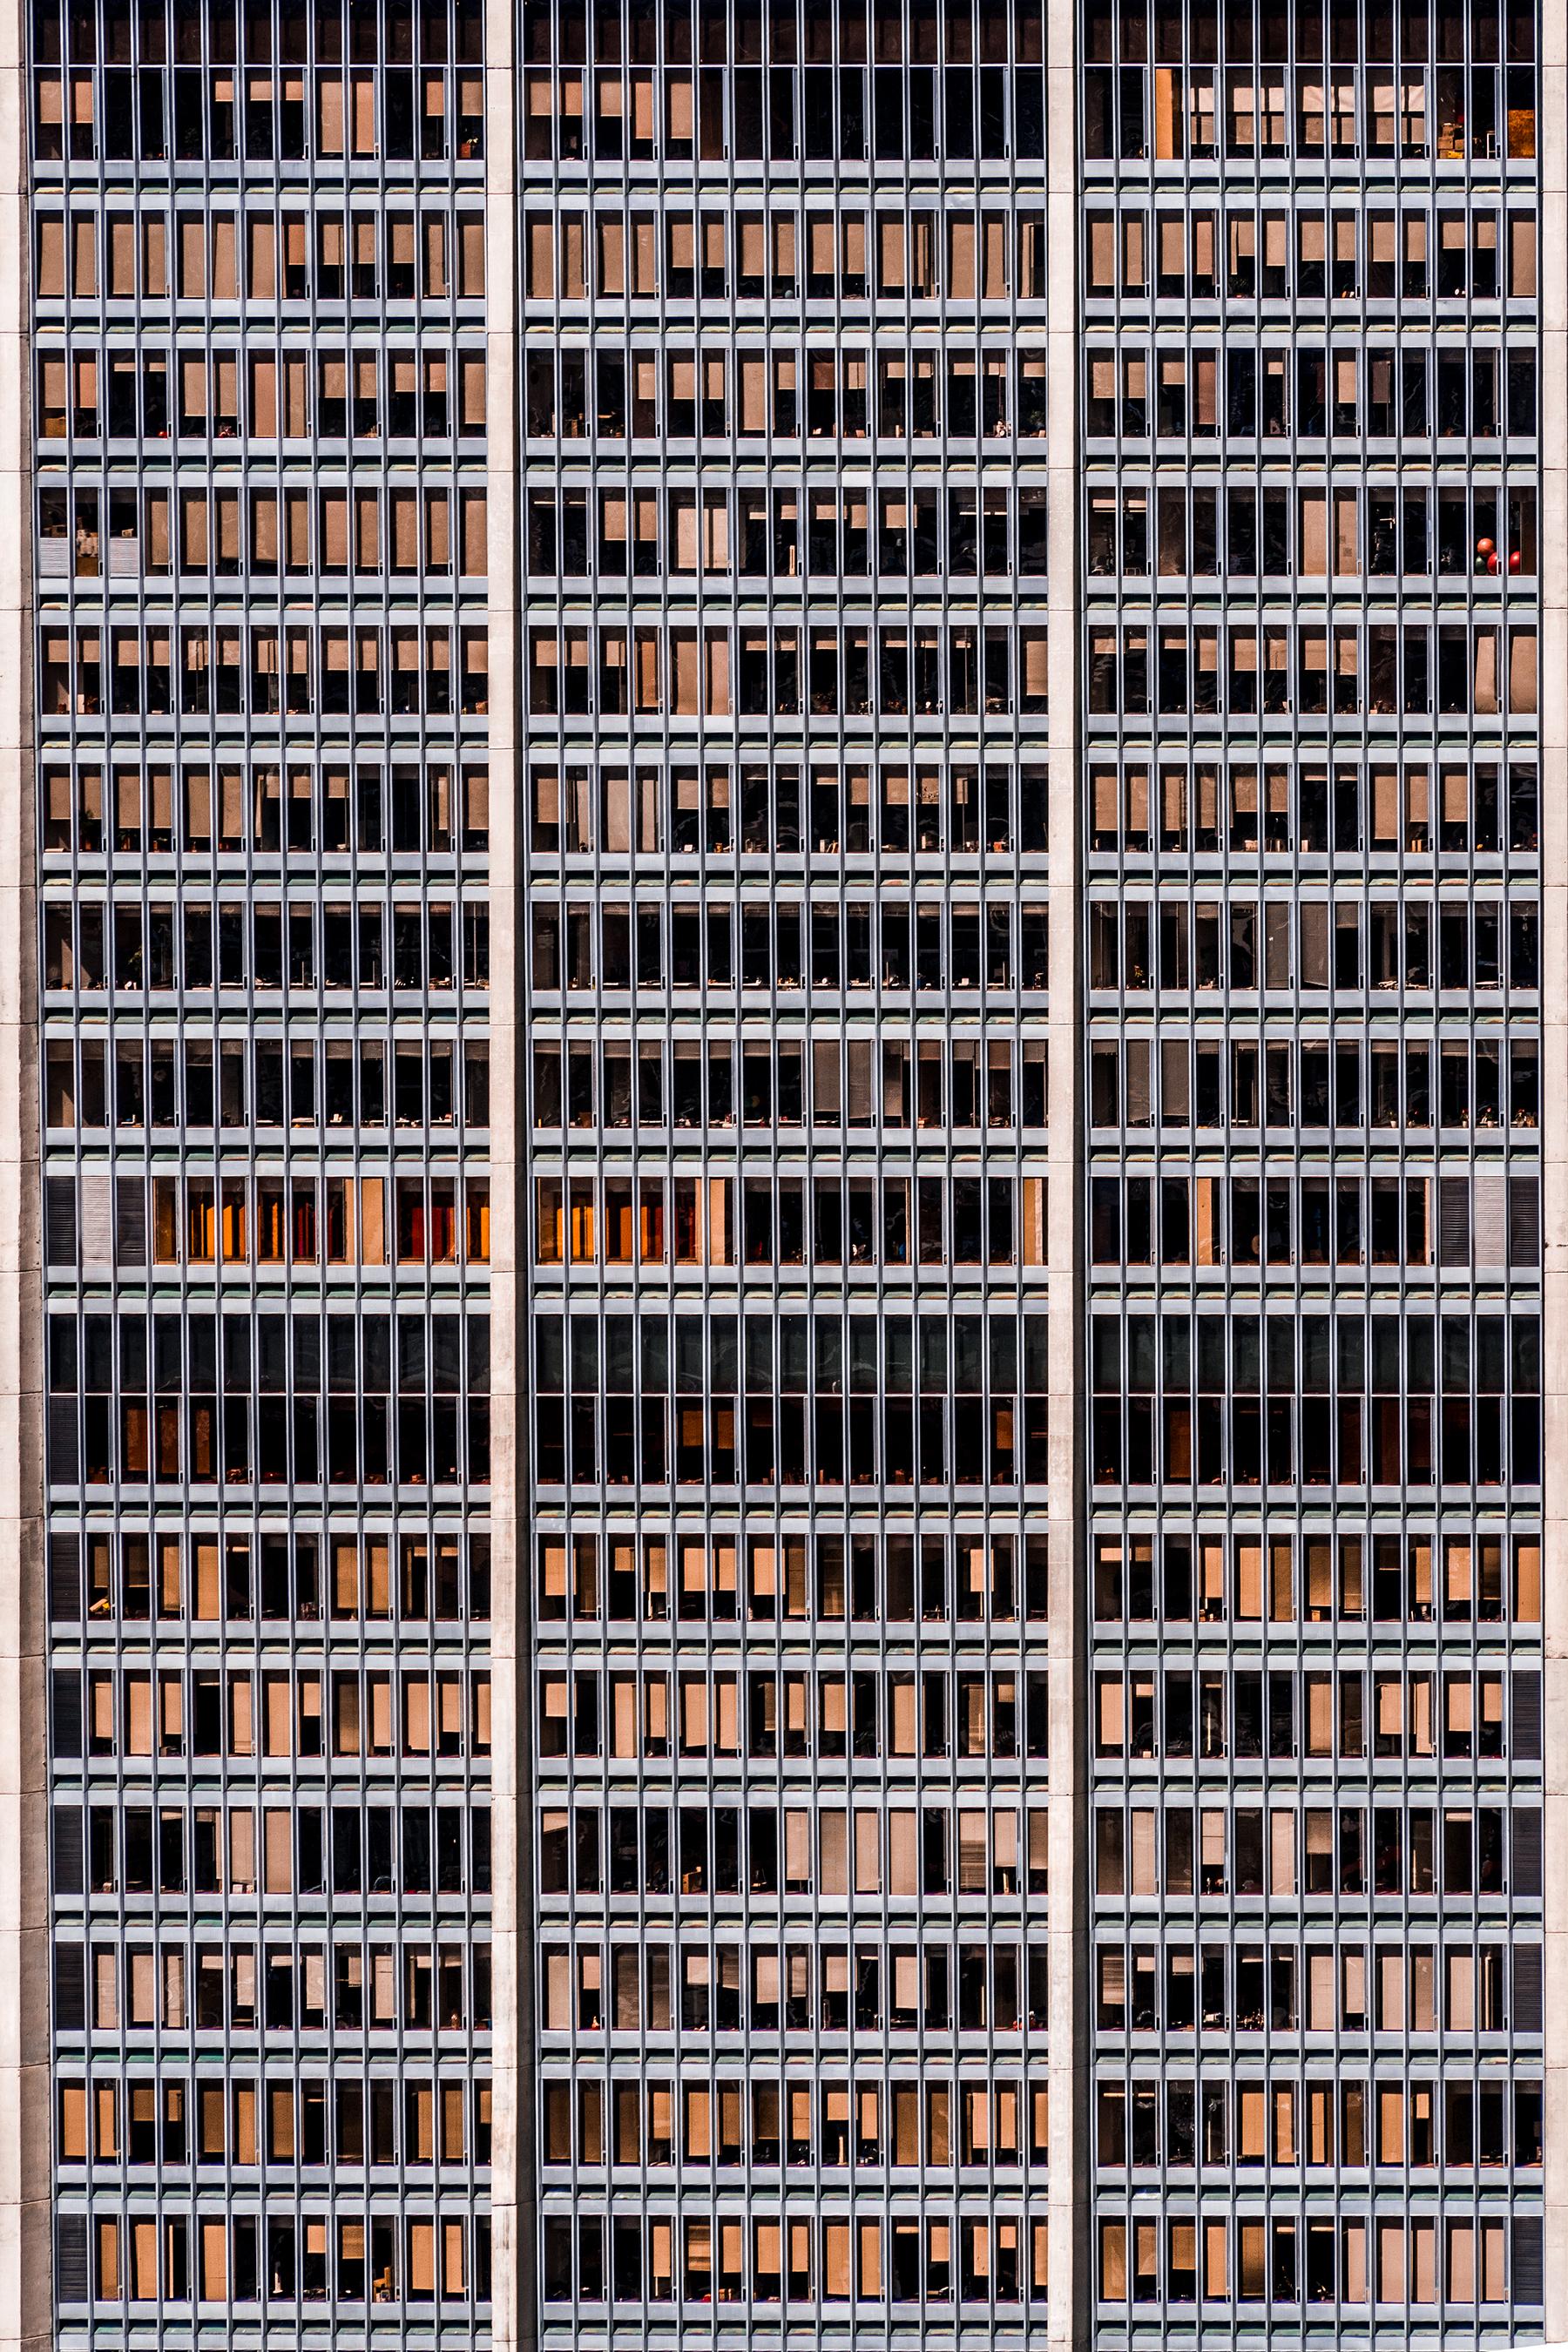 1004 Windows. Abstract architectural  landscape color photograph 